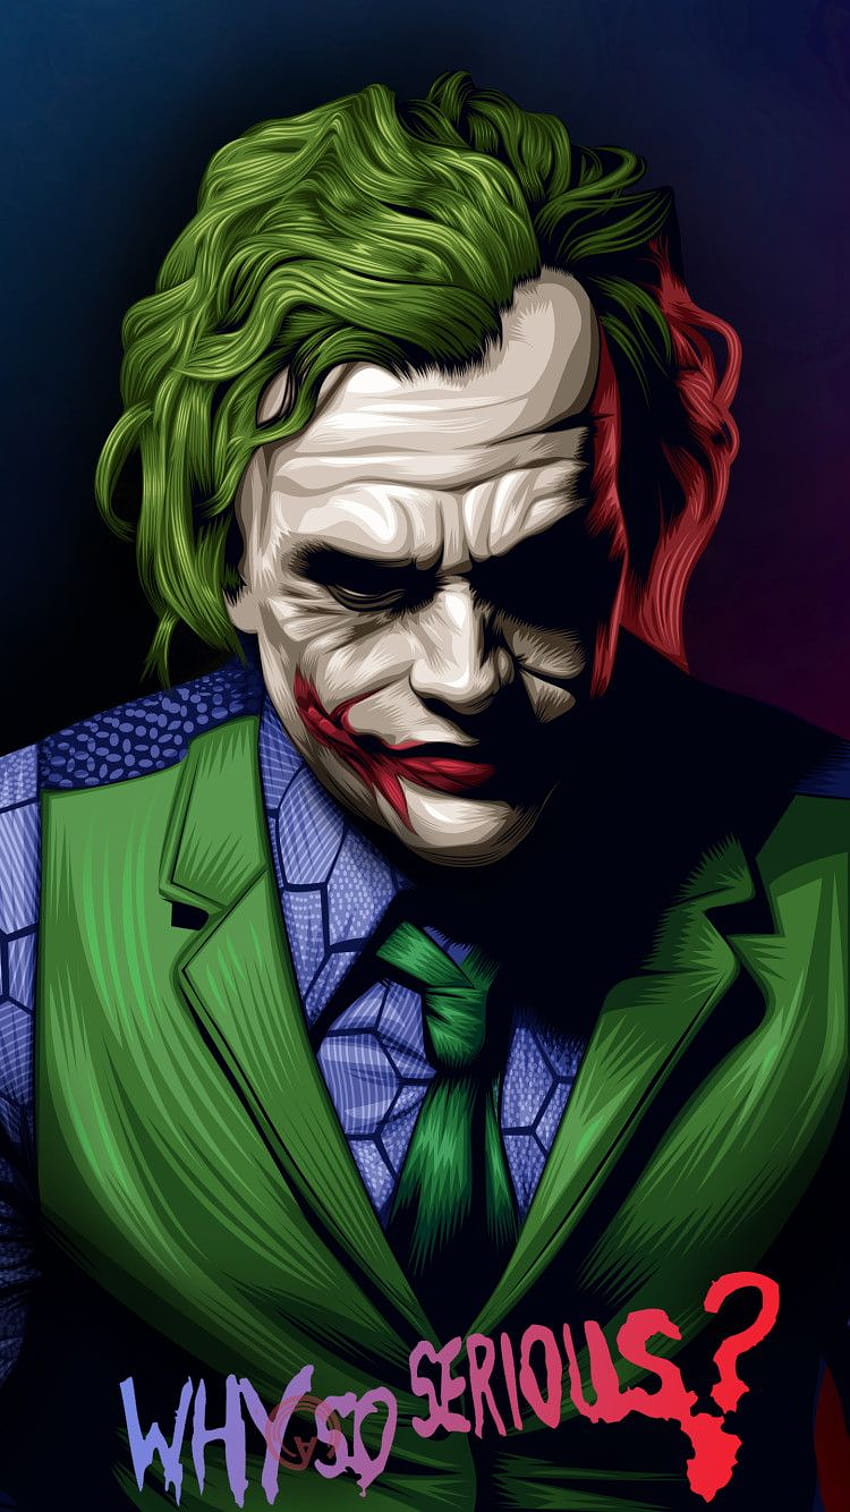 Marvel for iphone x: March 1996, why so serious amoled HD phone wallpaper